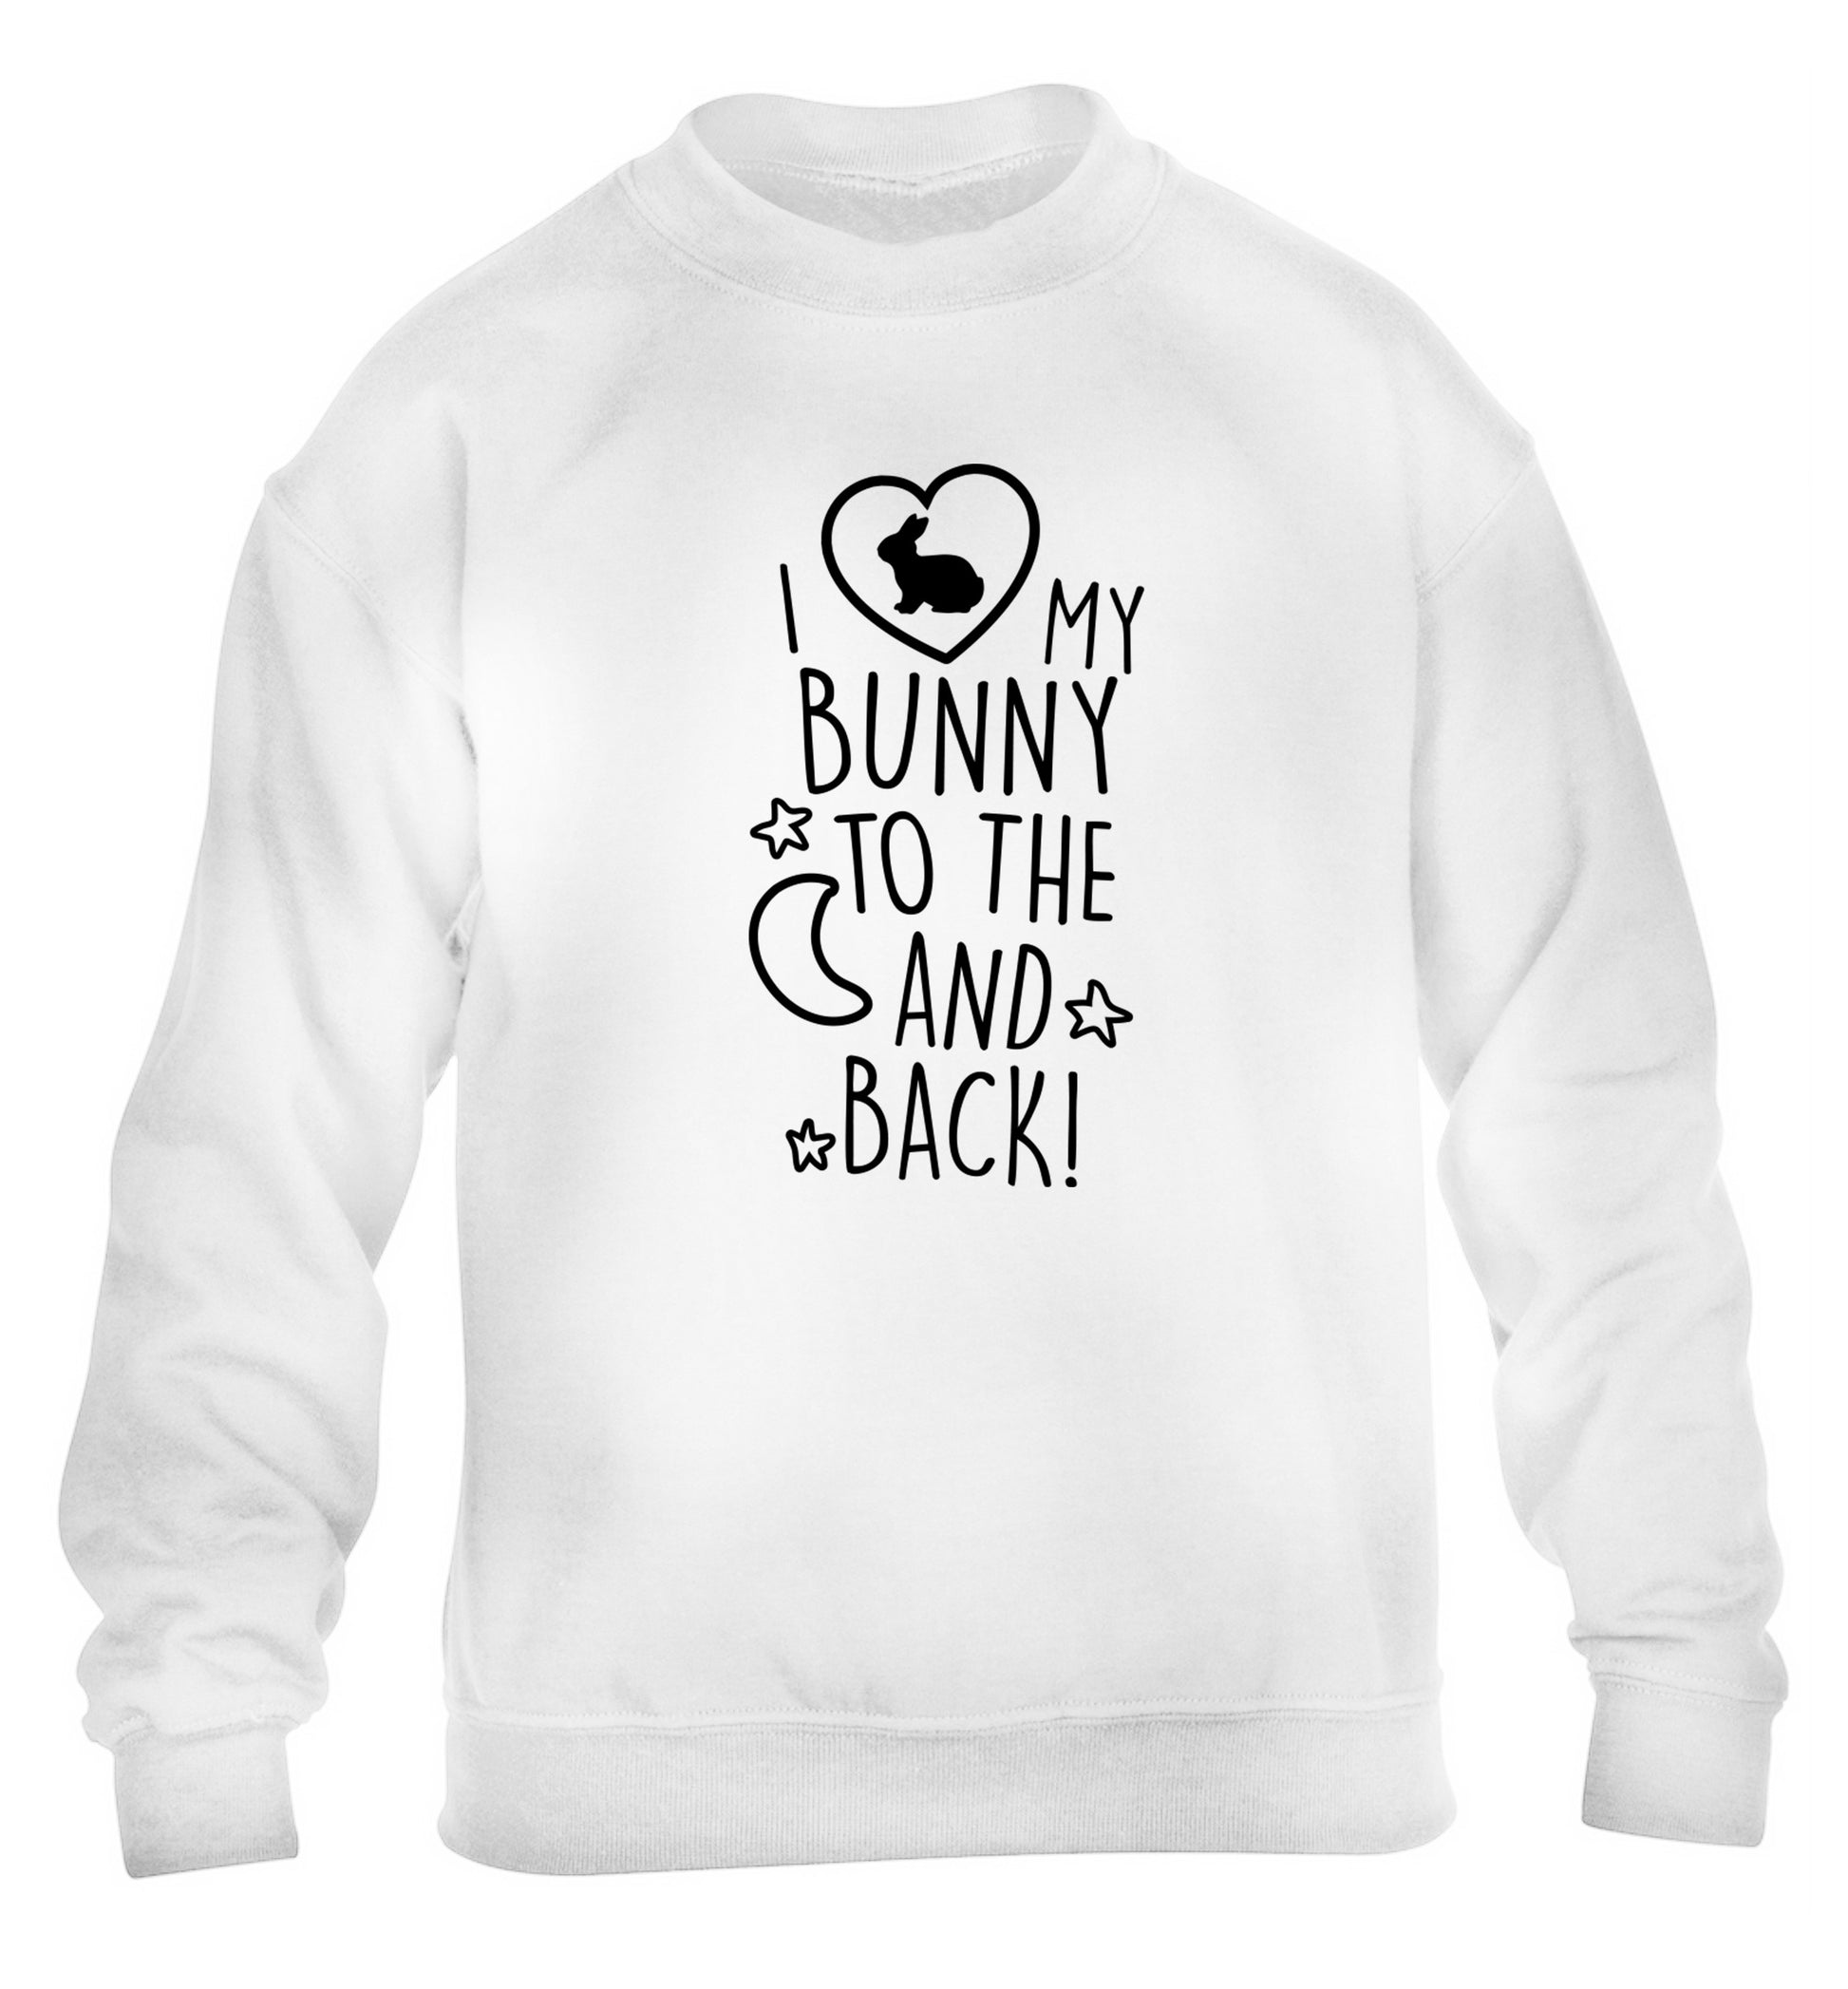 I love my bunny to the moon and back children's white  sweater 12-14 Years